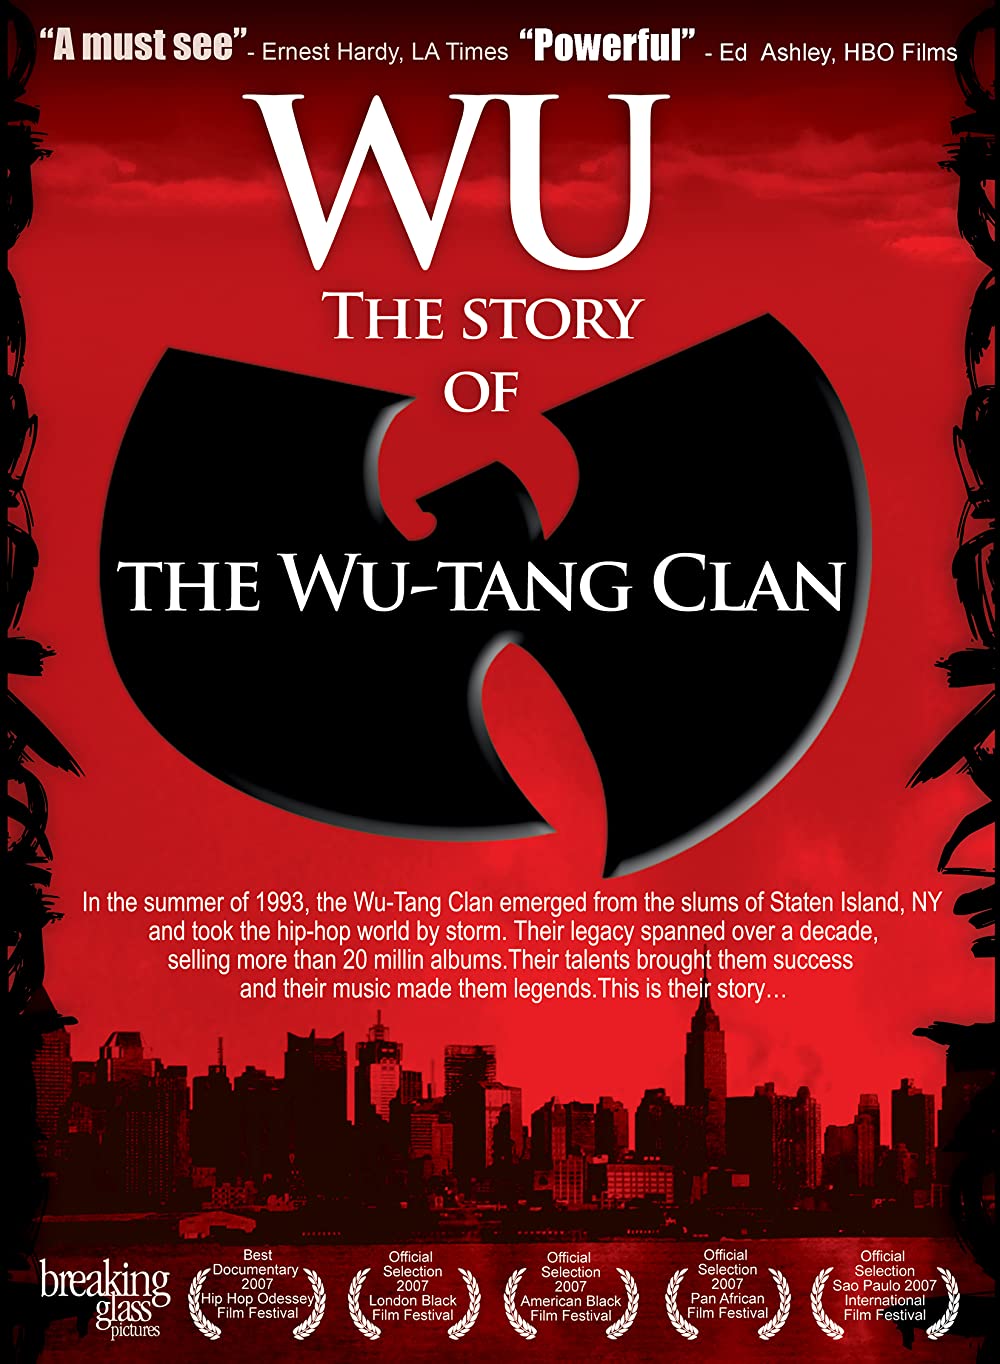 Download Wu: The Story of the Wu-Tang Clan Movie | Wu: The Story Of The Wu-tang Clan Online